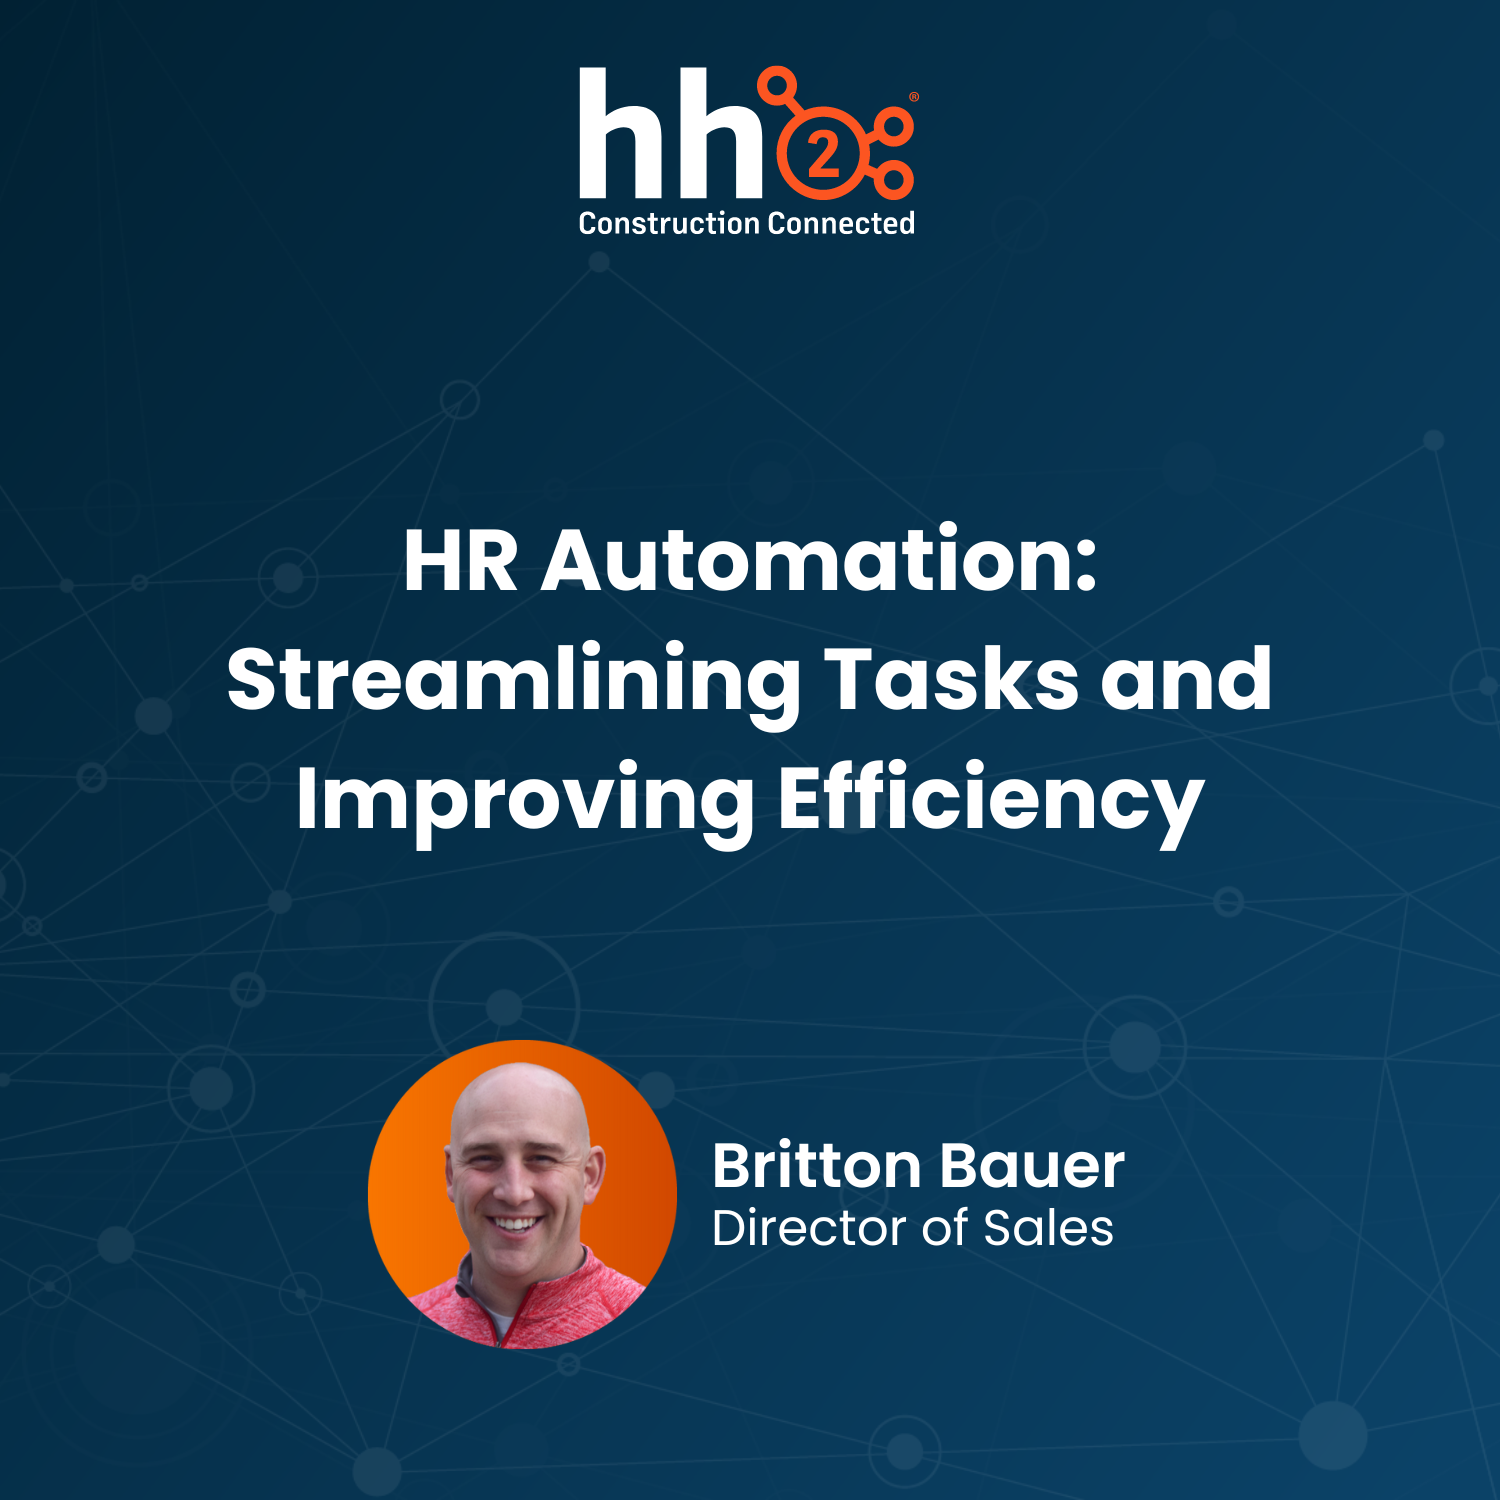 HR Automation: Streamlining Tasks and Improving Efficiency